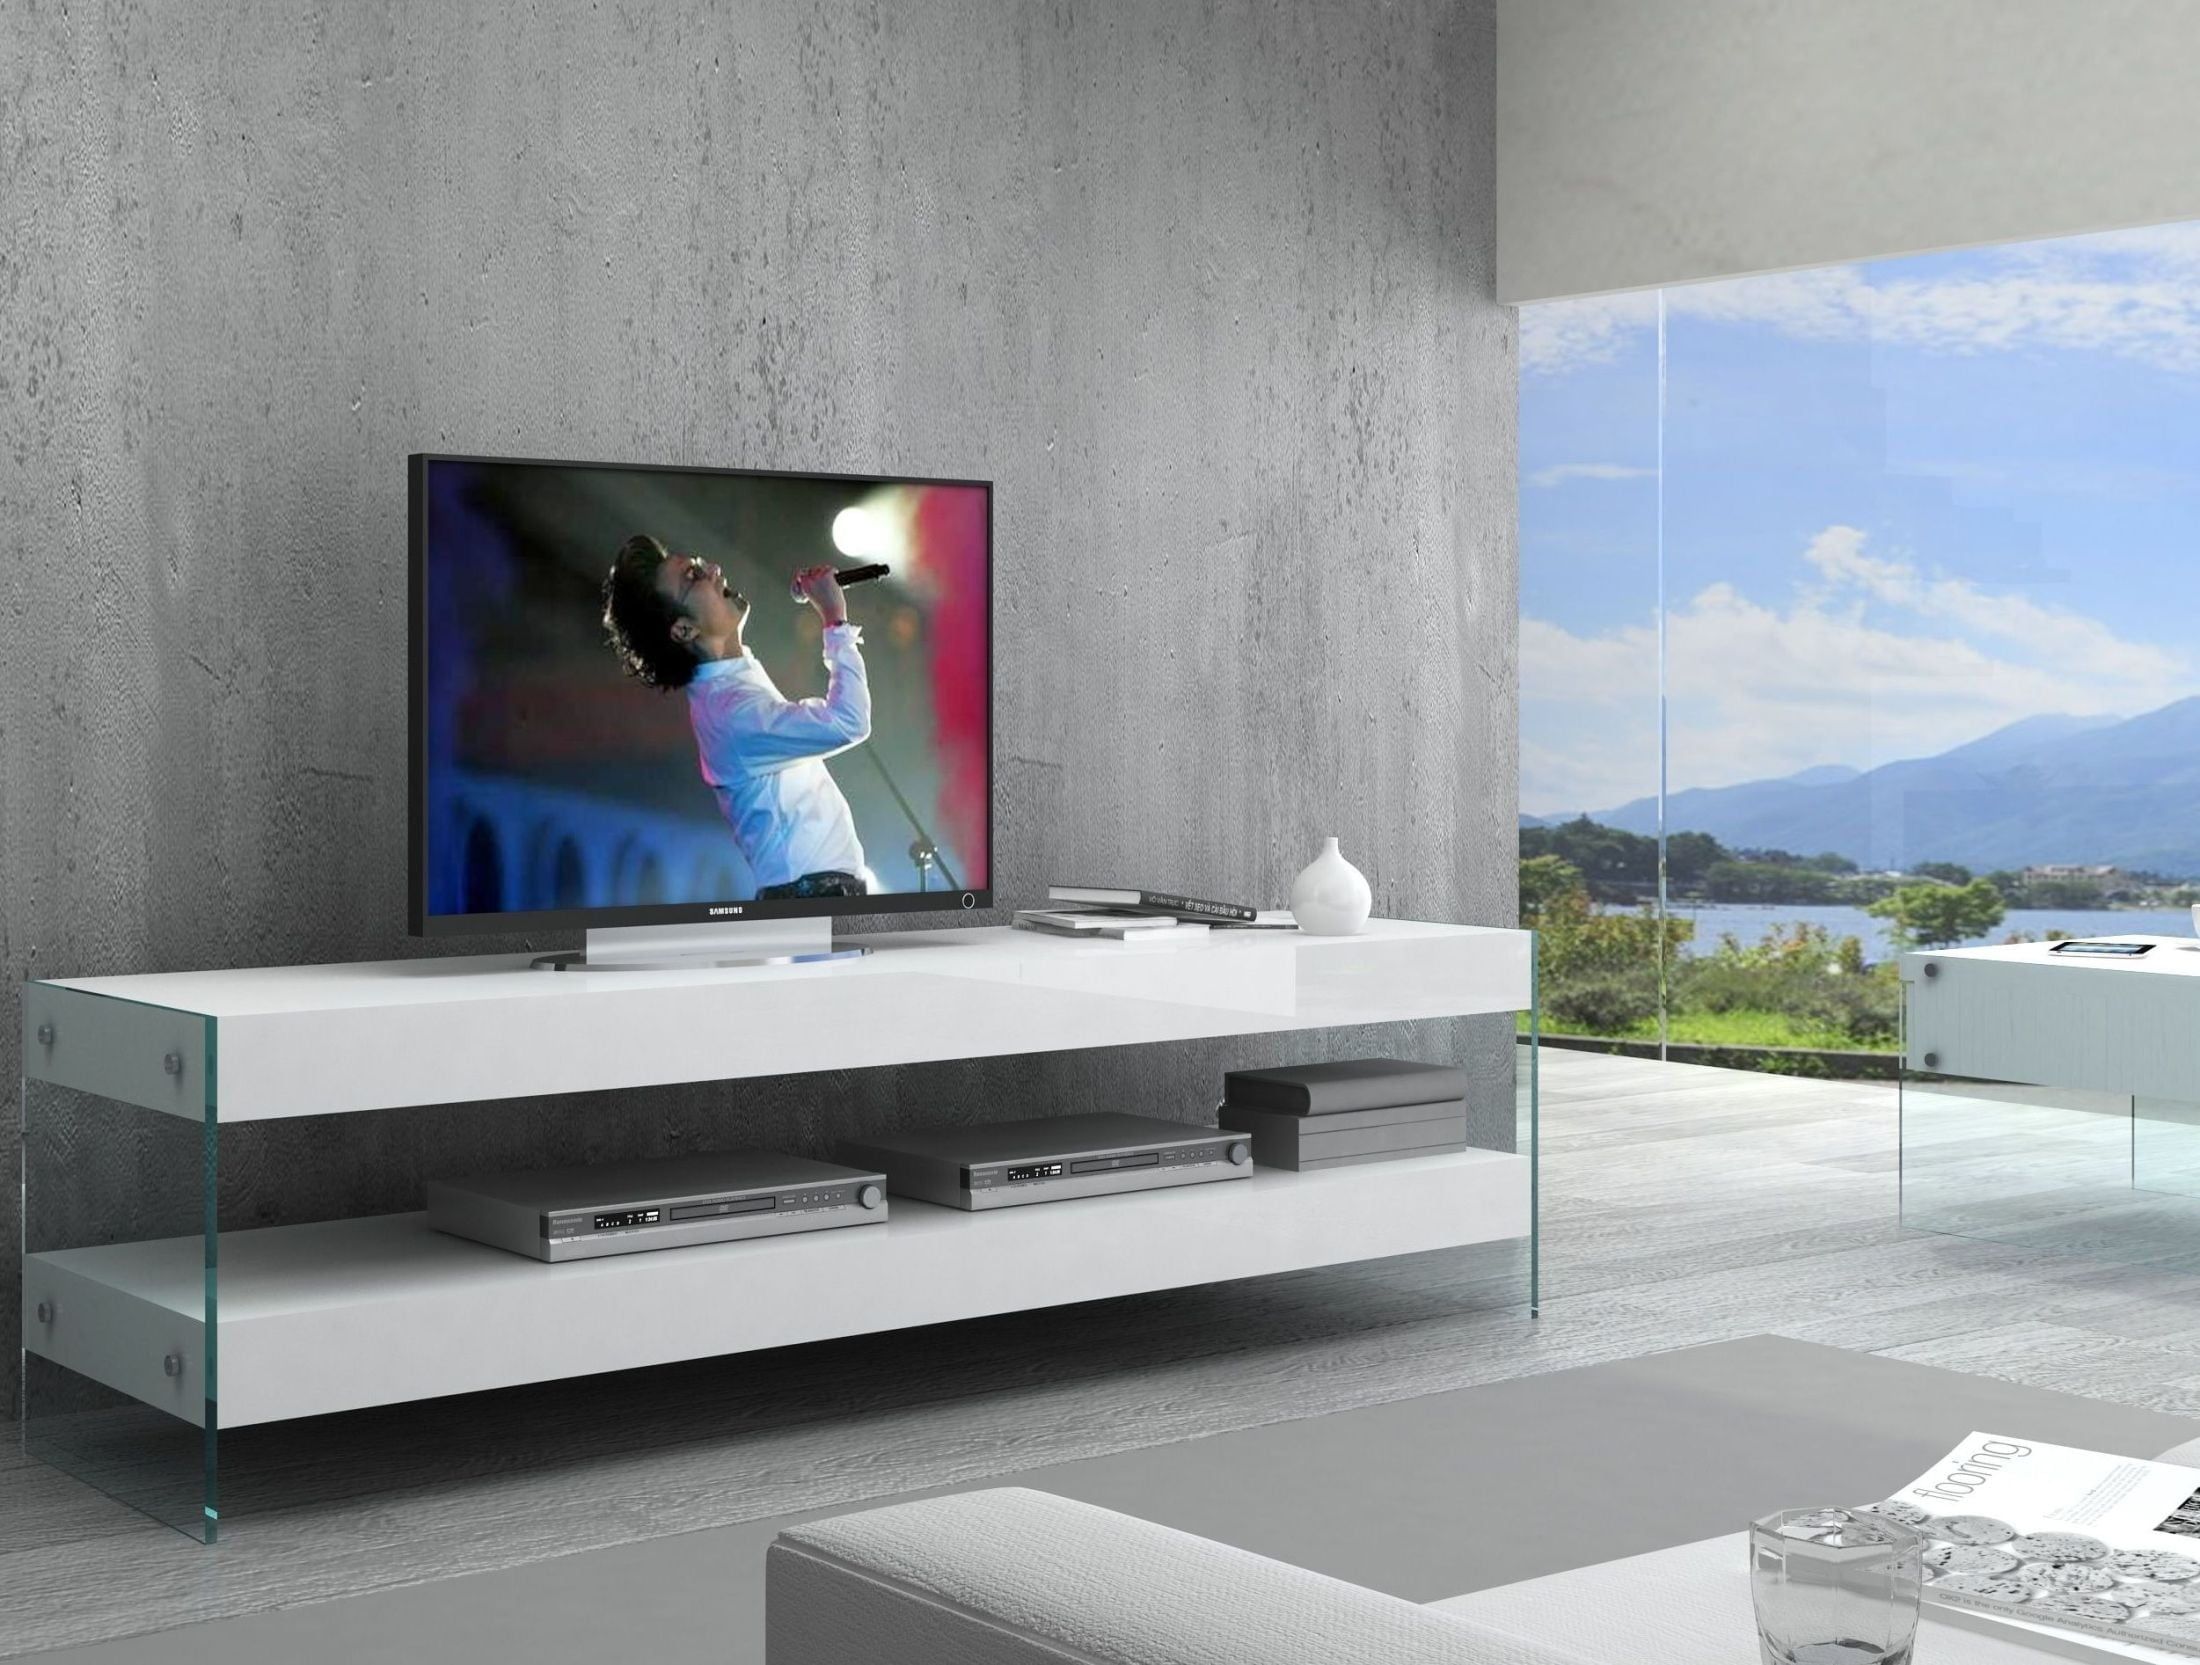 Cloud White High Gloss Tv Stand From Jnm | Coleman Furniture Pertaining To Gloss White Tv Stands (View 8 of 15)